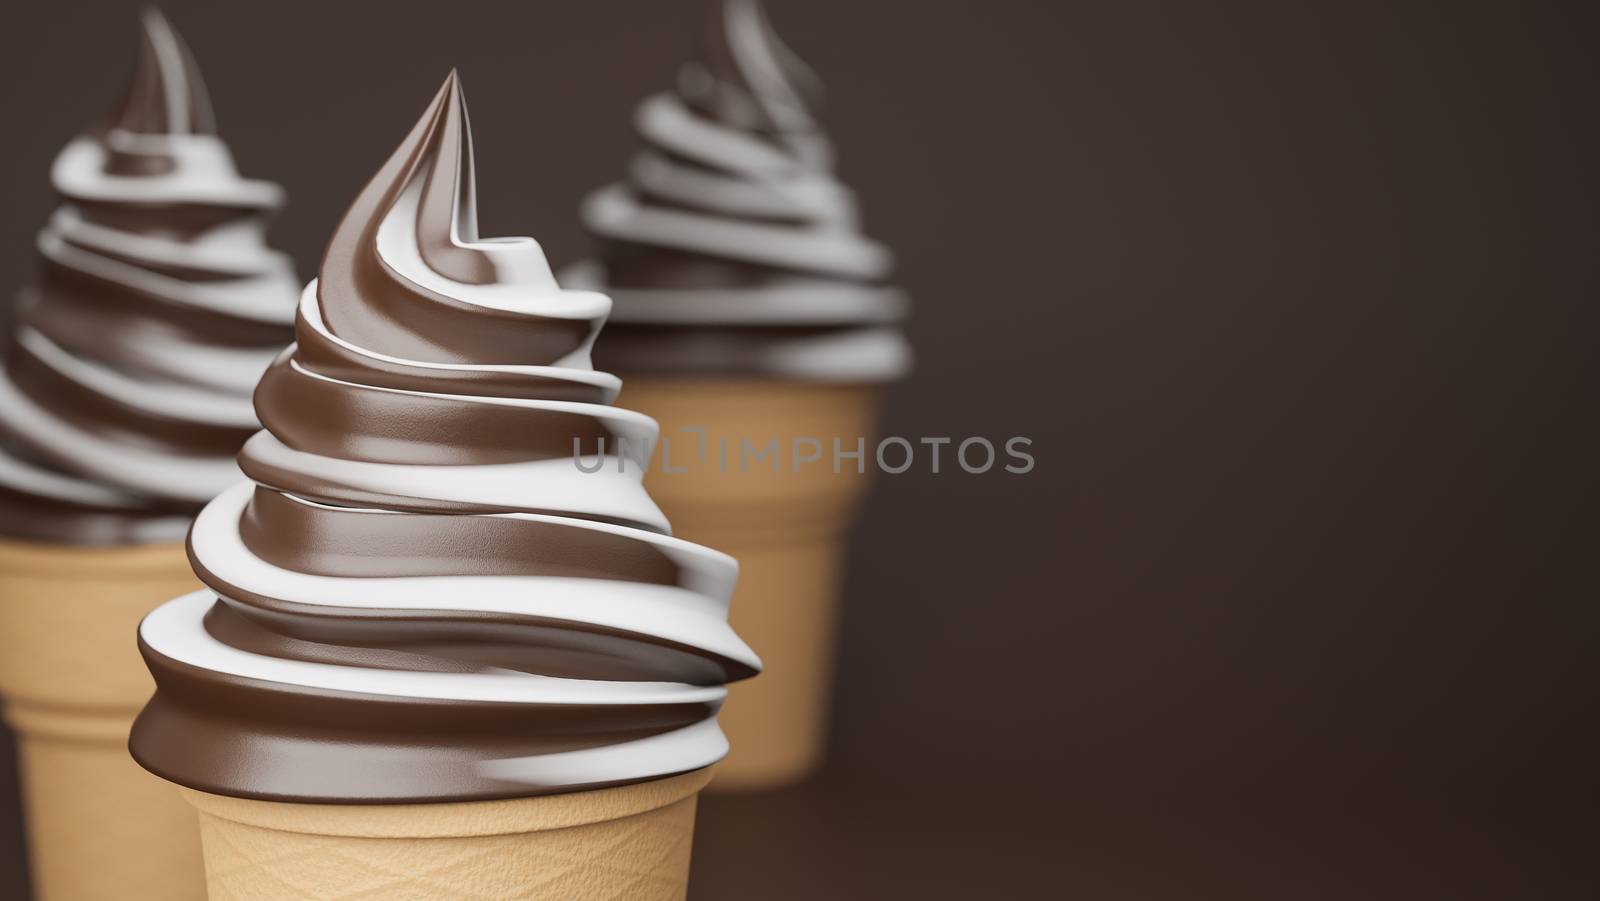 Soft serve ice cream of chocolate and milk flavours on crispy cone on brown background.,3d model and illustration. by anotestocker